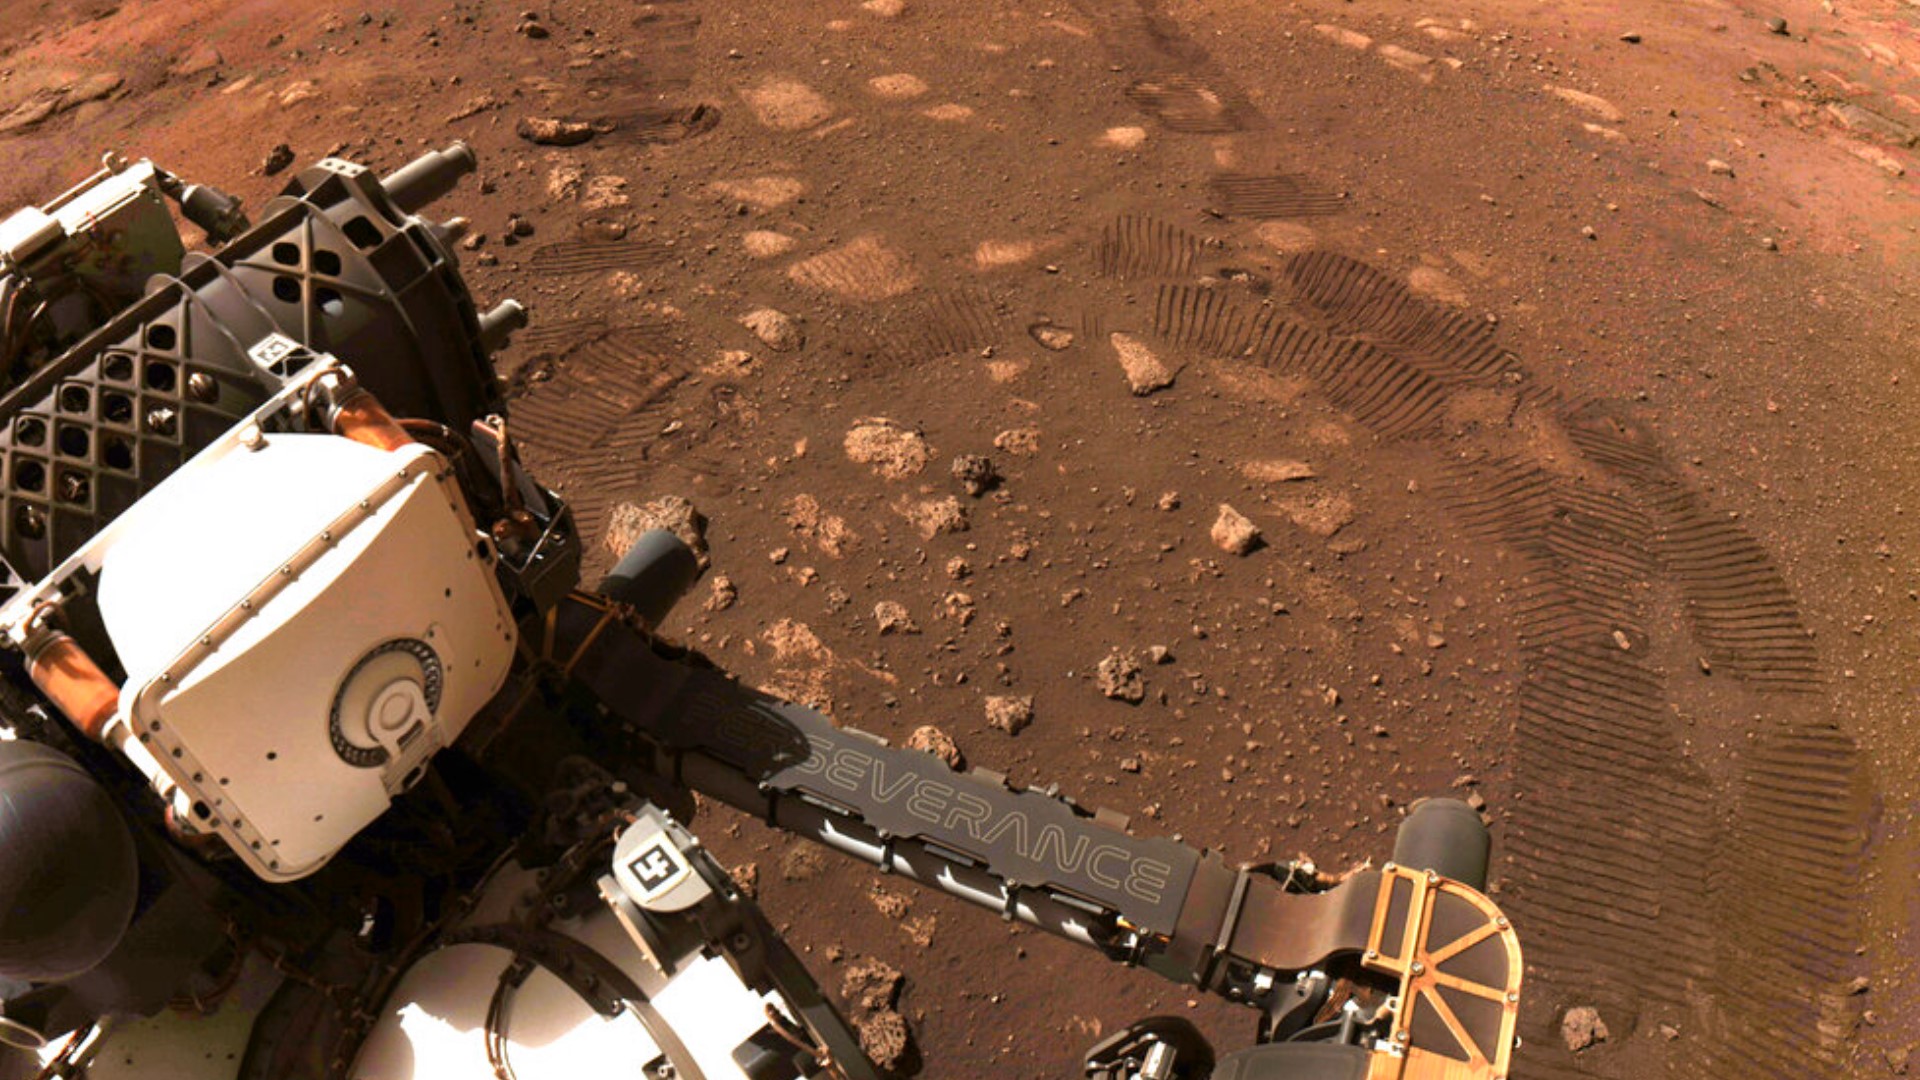 A NASA rover on Mars by chance had its microphone on when a whirling tower of red dust passed overhead last year and caught the sound.